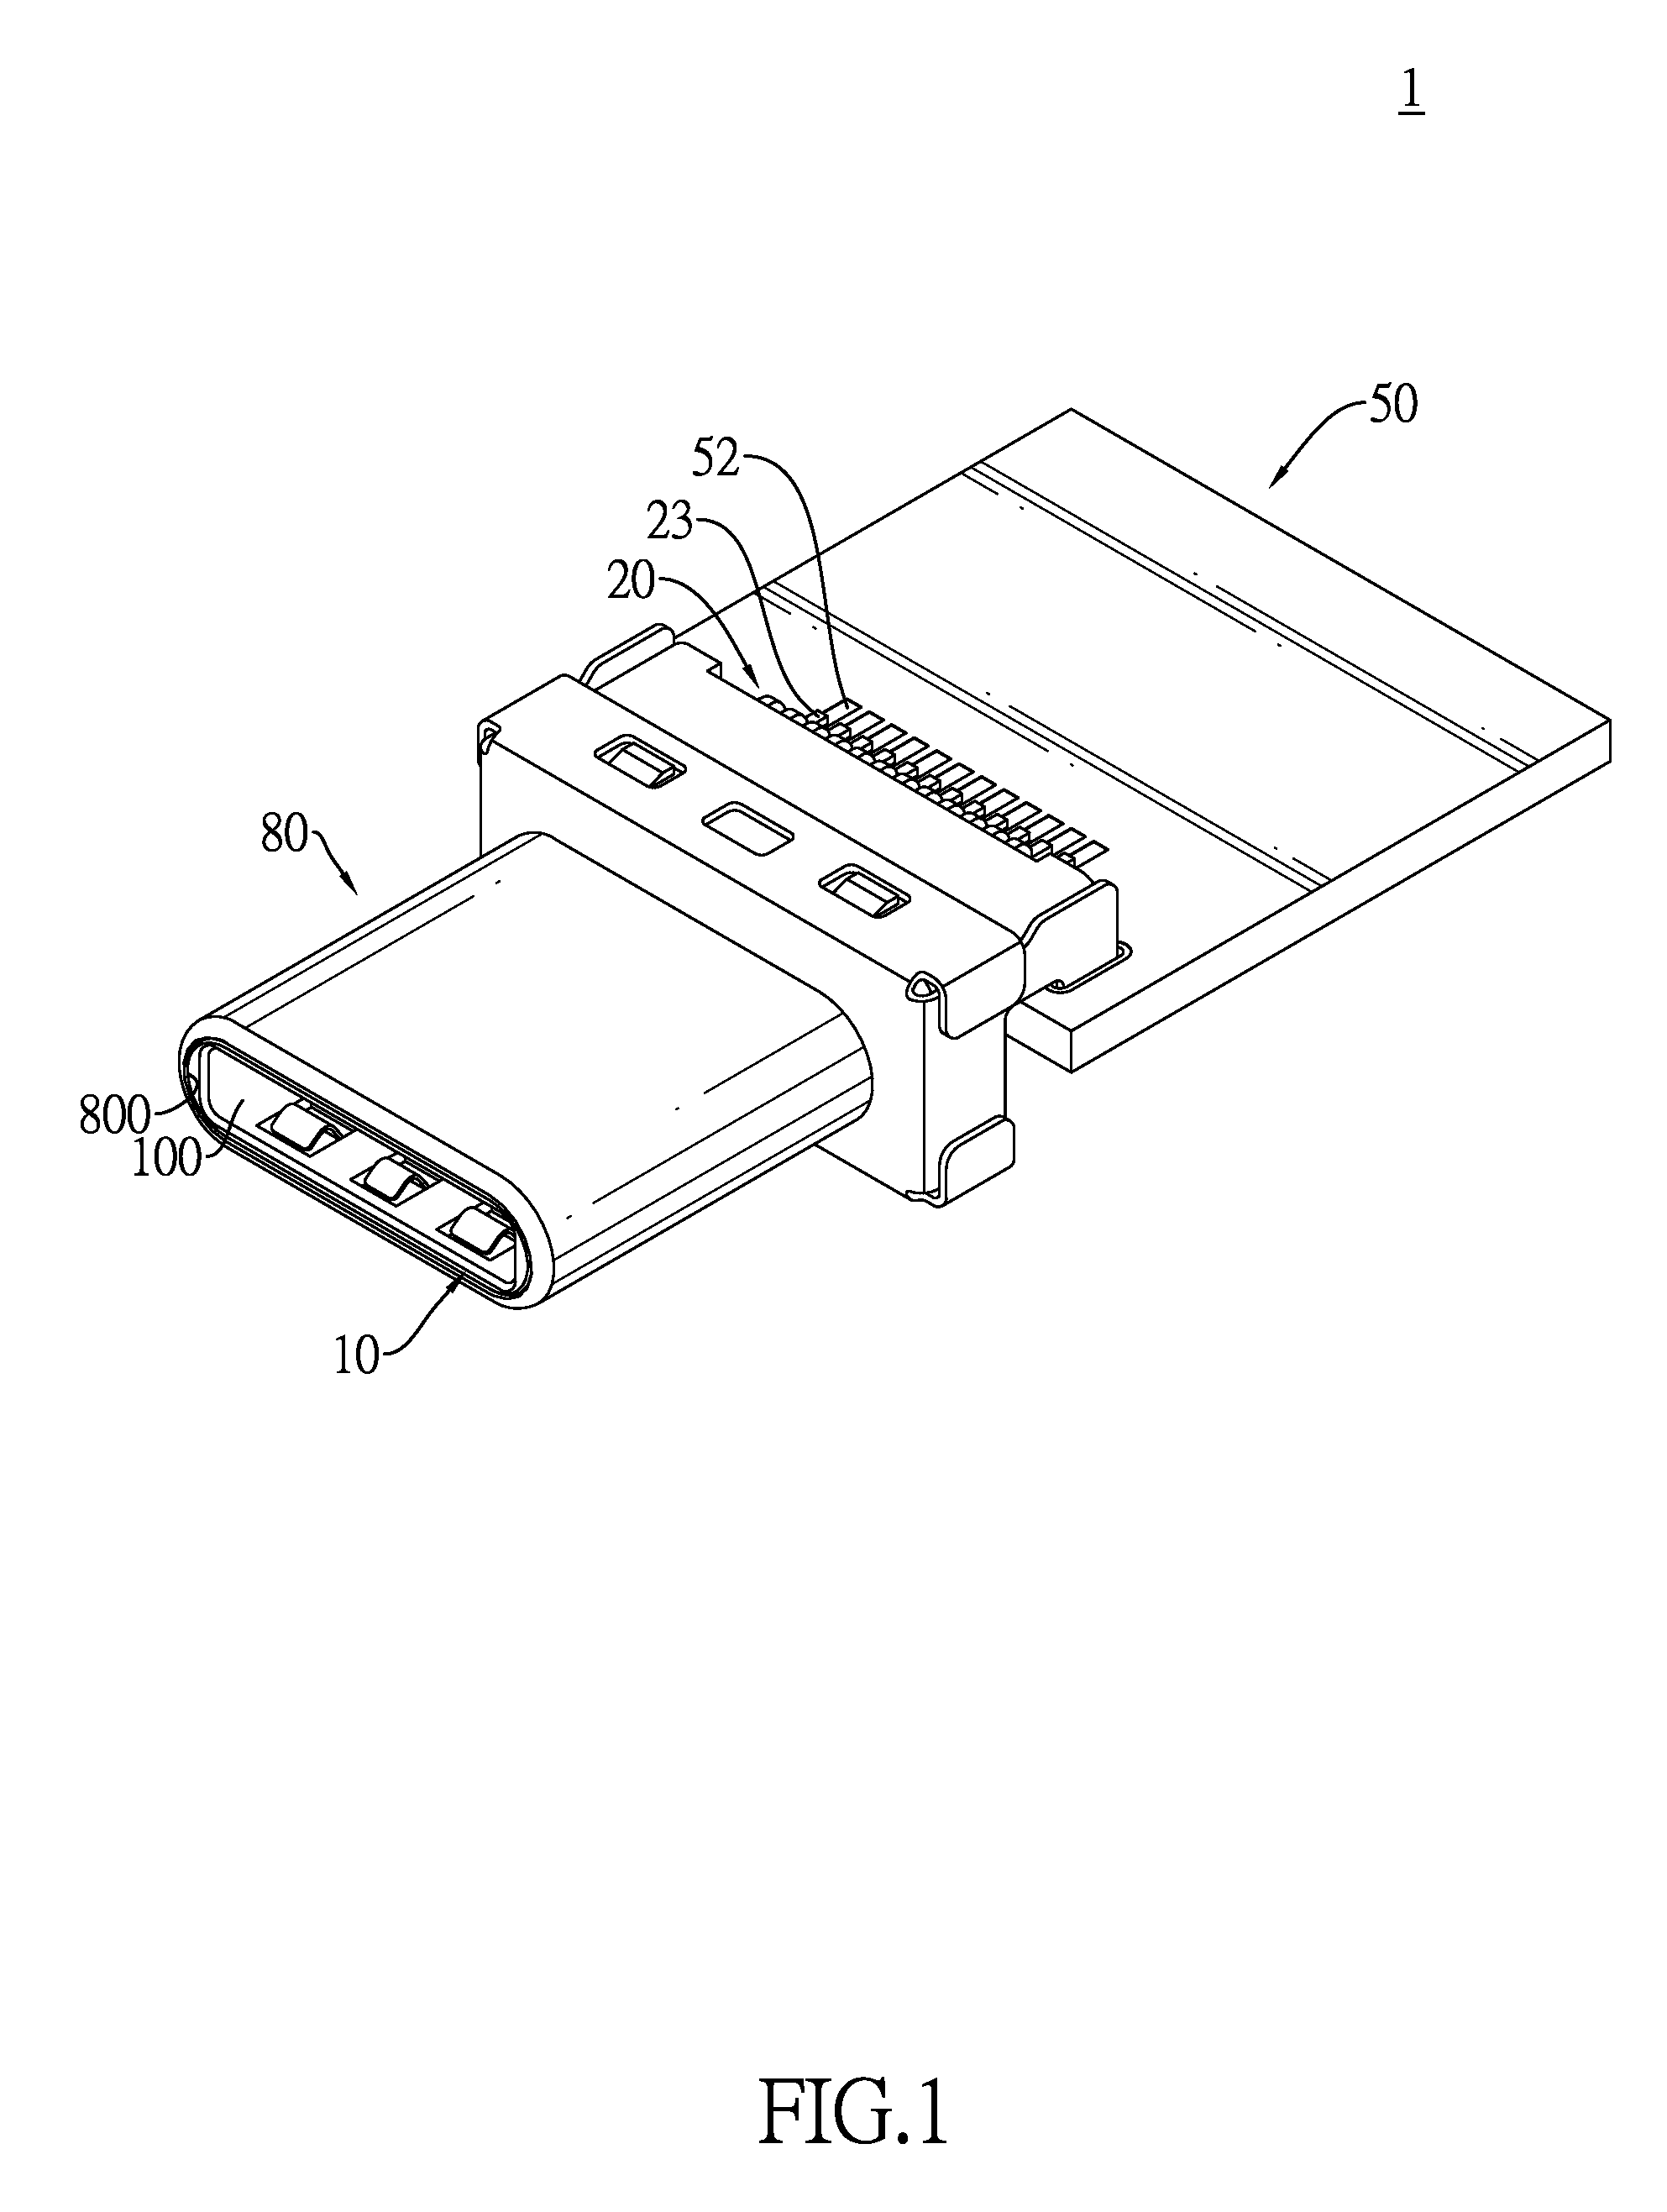 Electrical plug connector assembly